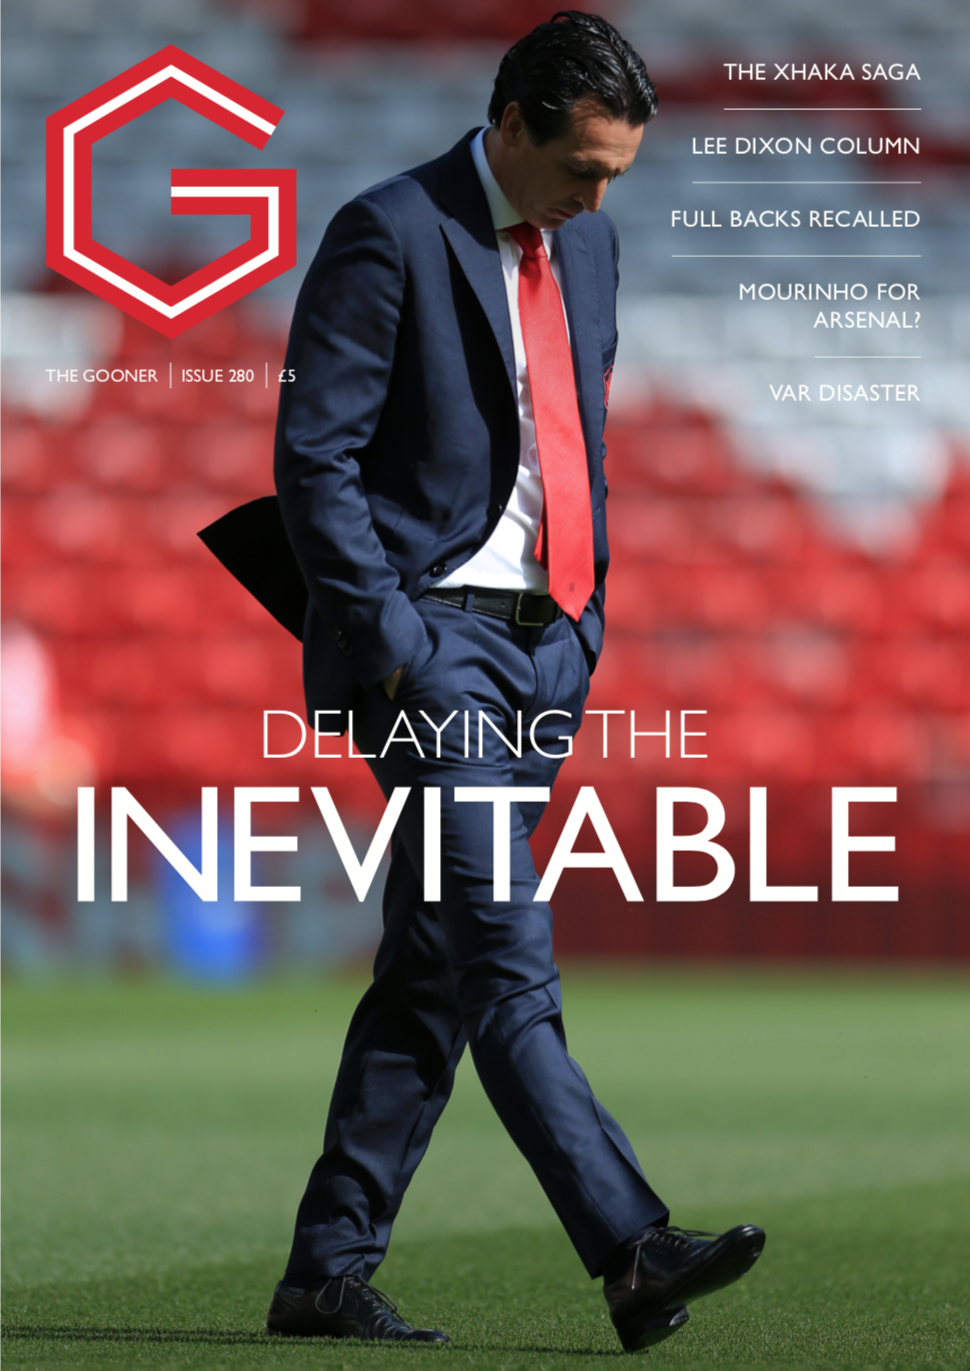 Gooner Issue 280 - Front Cover